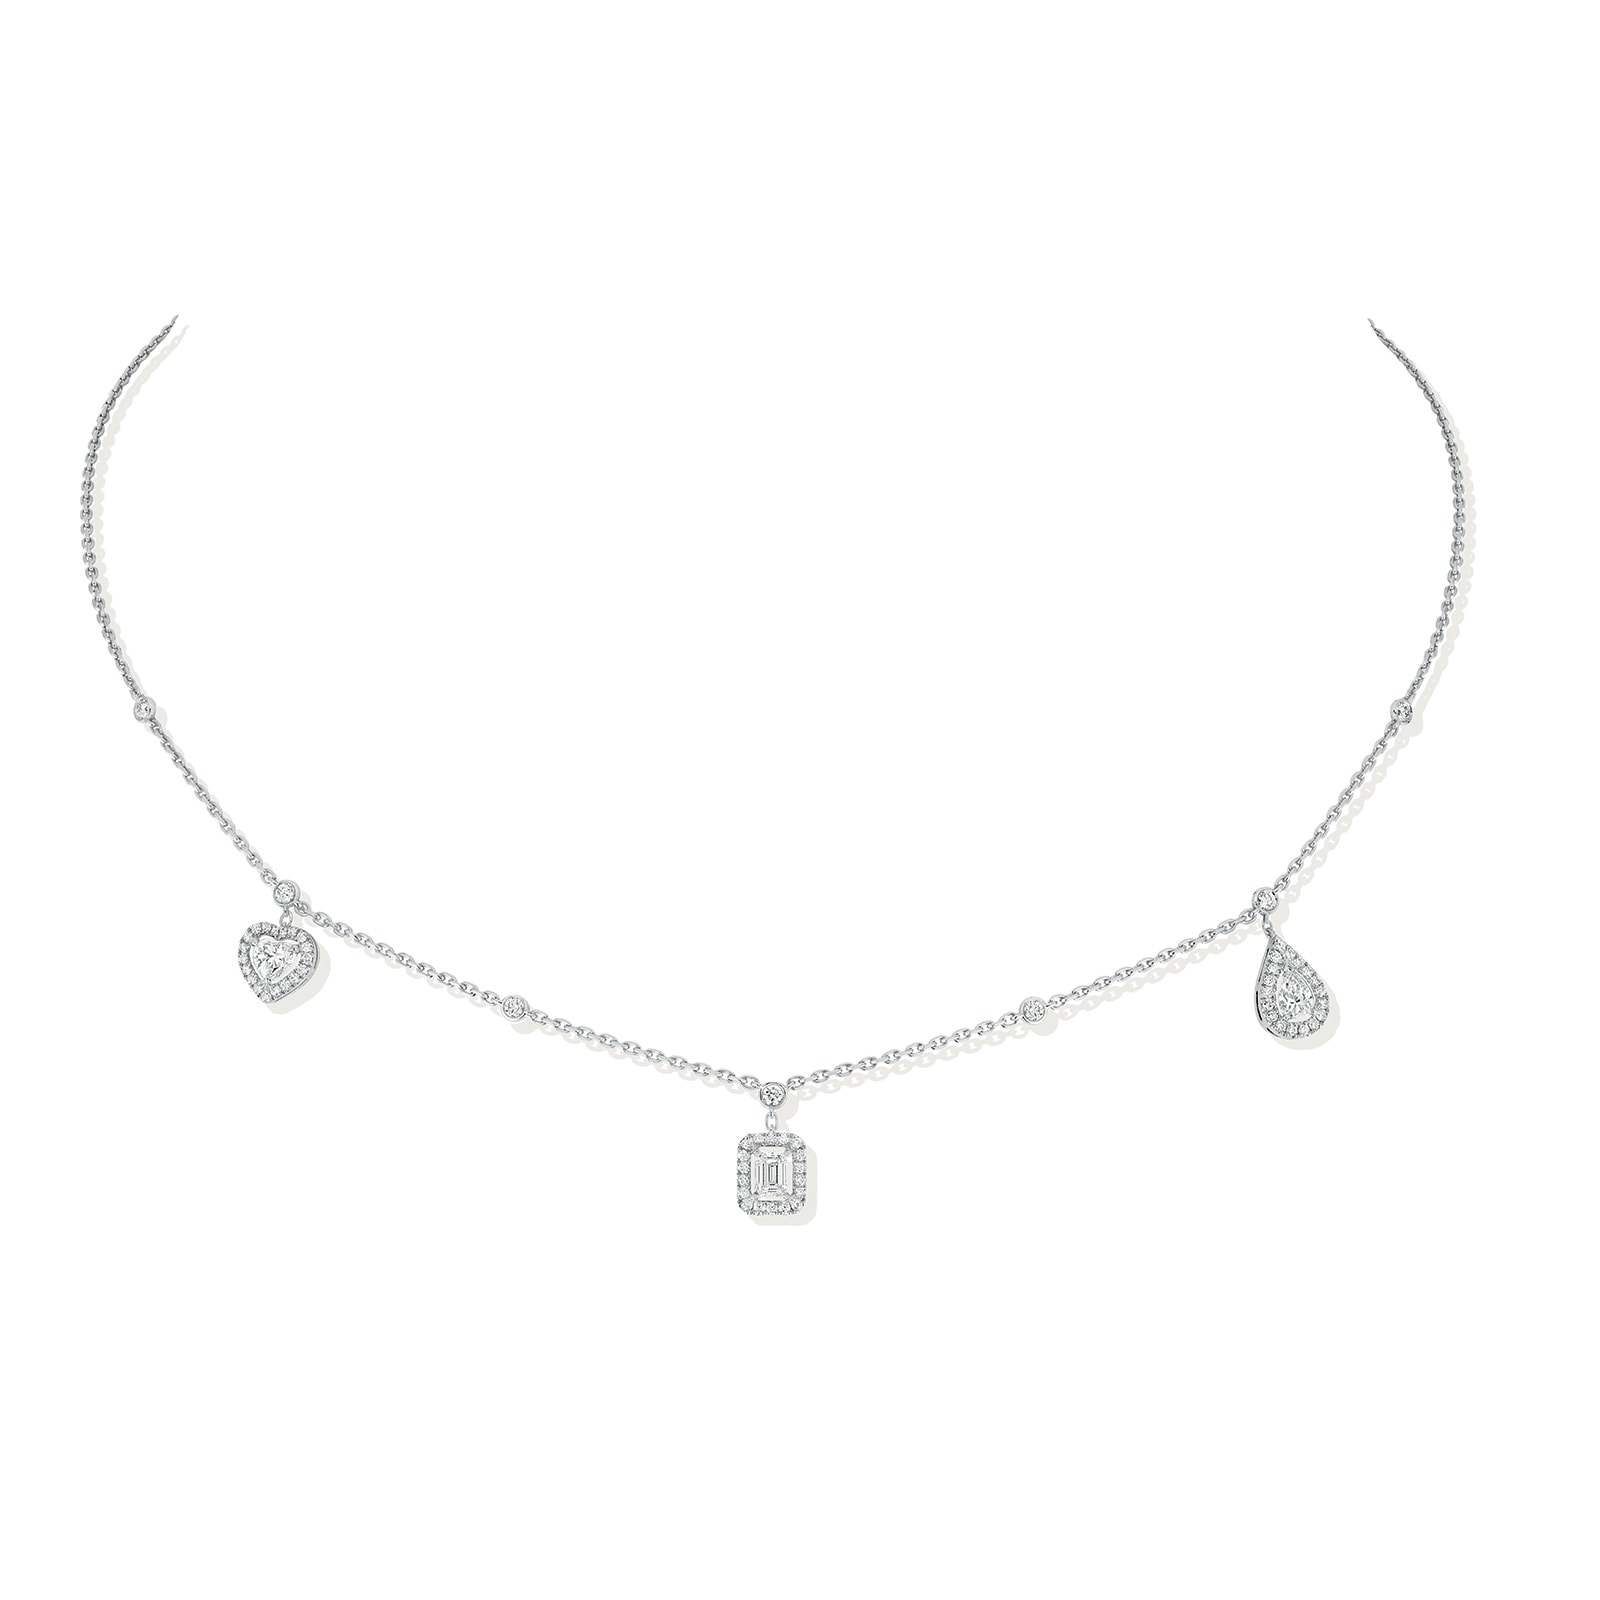 Diamond Trio Necklace – Written by Forest